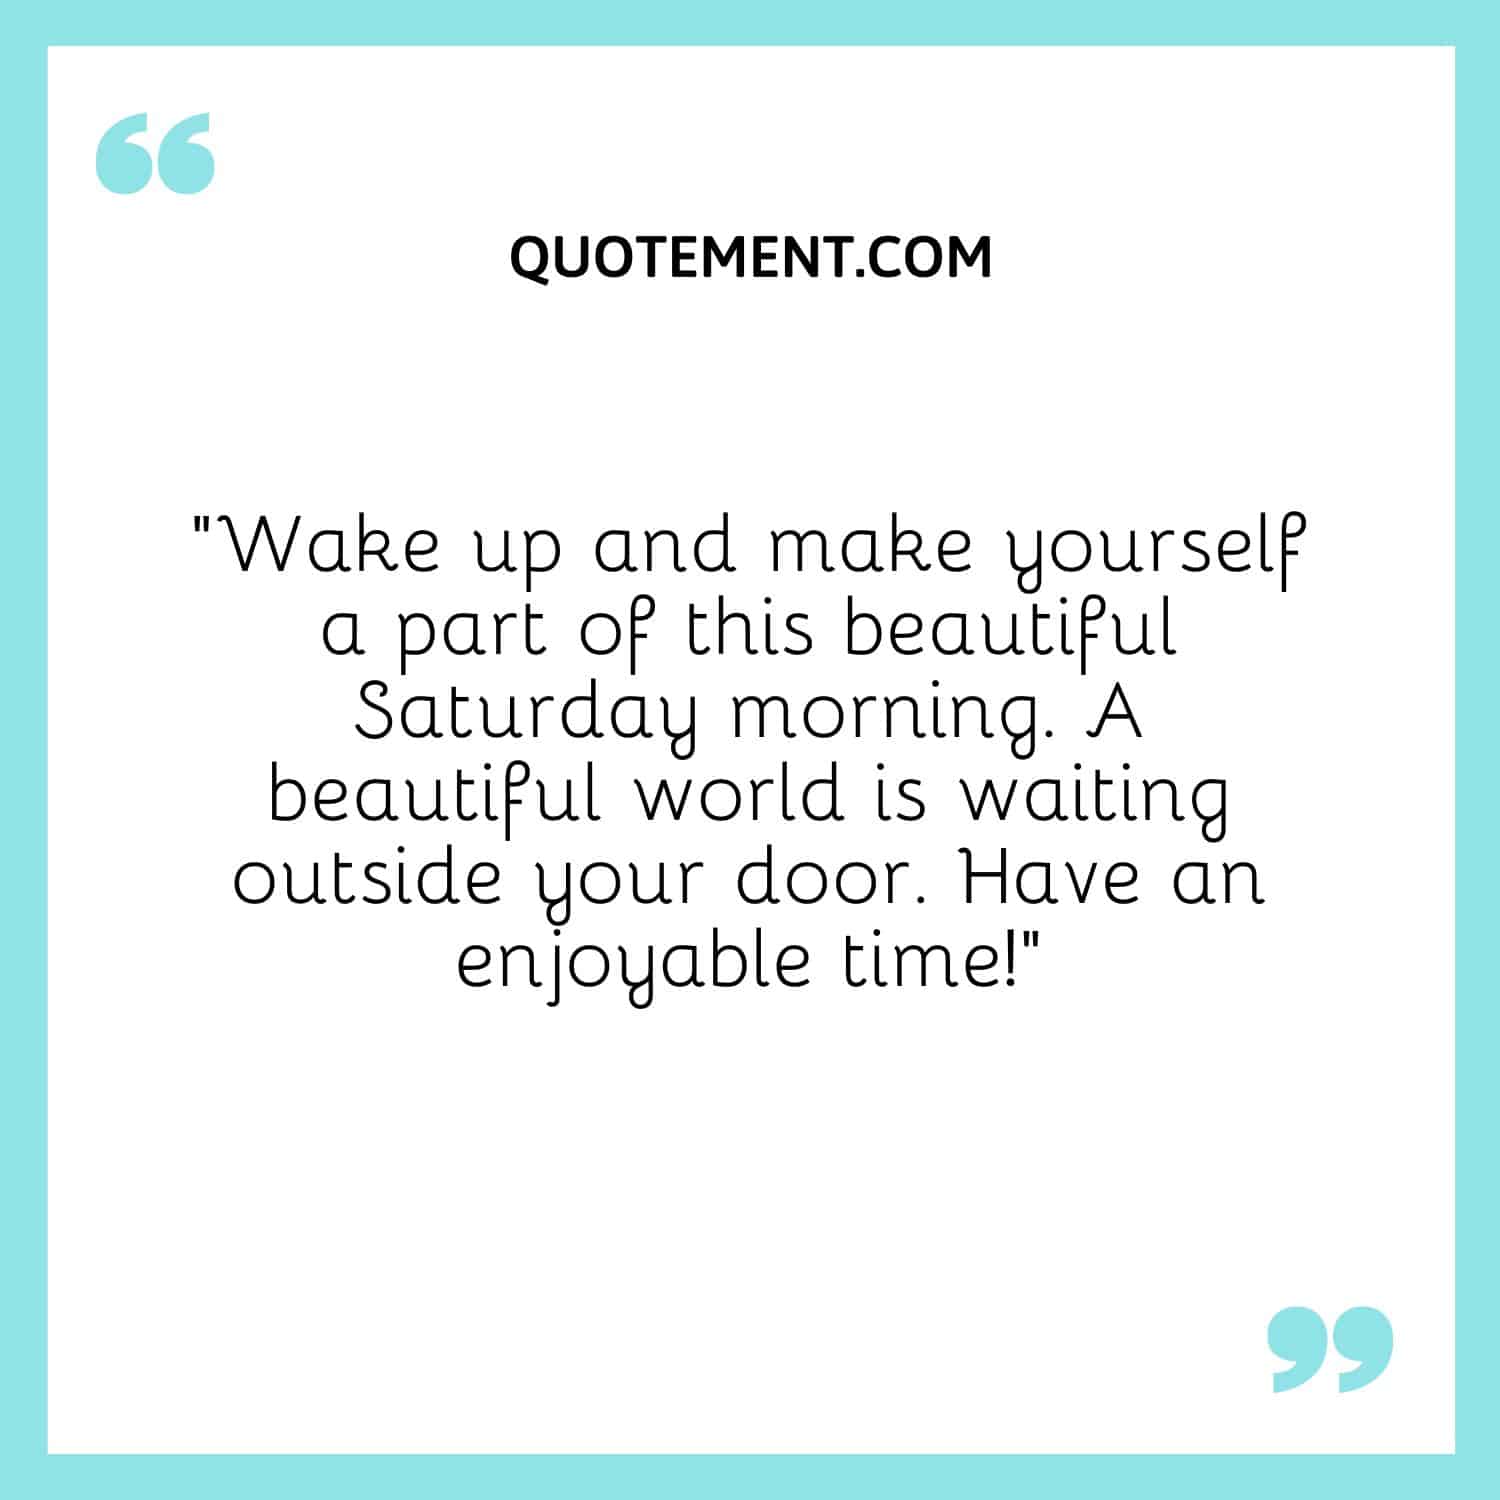 “Wake up and make yourself a part of this beautiful Saturday morning. A beautiful world is waiting outside your door. Have an enjoyable time!”